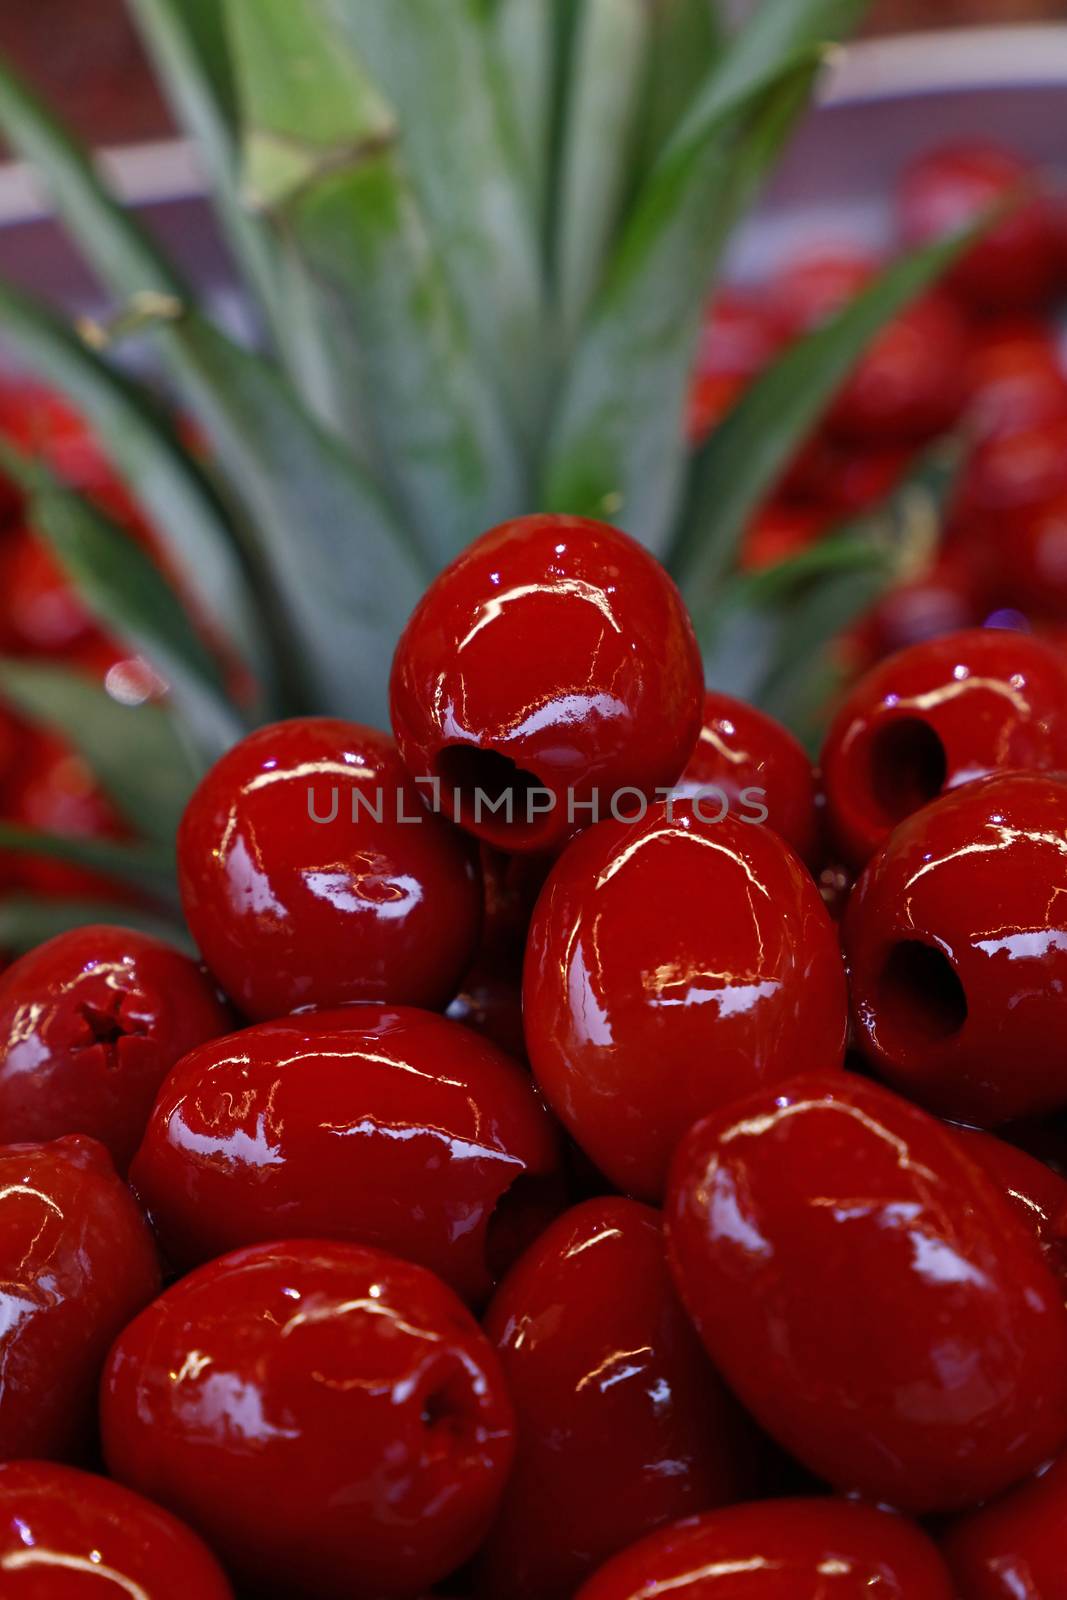 Red pitted glossy Italian Cerignola olives in oil close up over green pineapple leaves, retail market stall display, low angle view